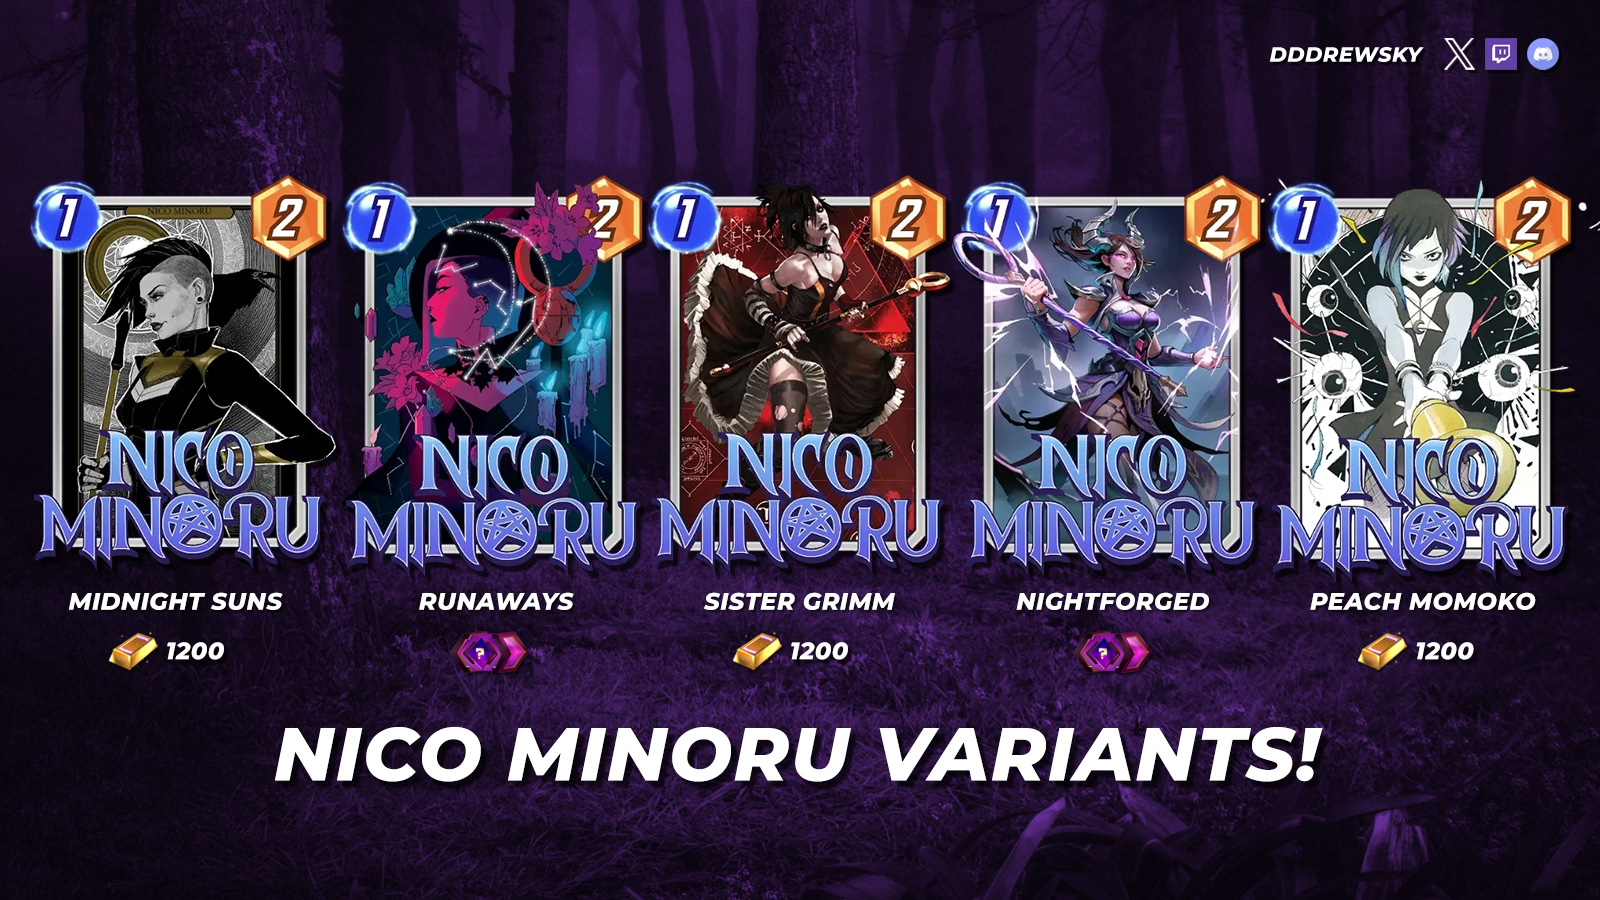 dddrewsky 💥 Marvel Snap on X: ✨ Nico Minoru Variants! ✨ She has one of  the STRONGEST variant library on debut. Her spotlight variants are AMAZING!  I'm a personal fan of Sister